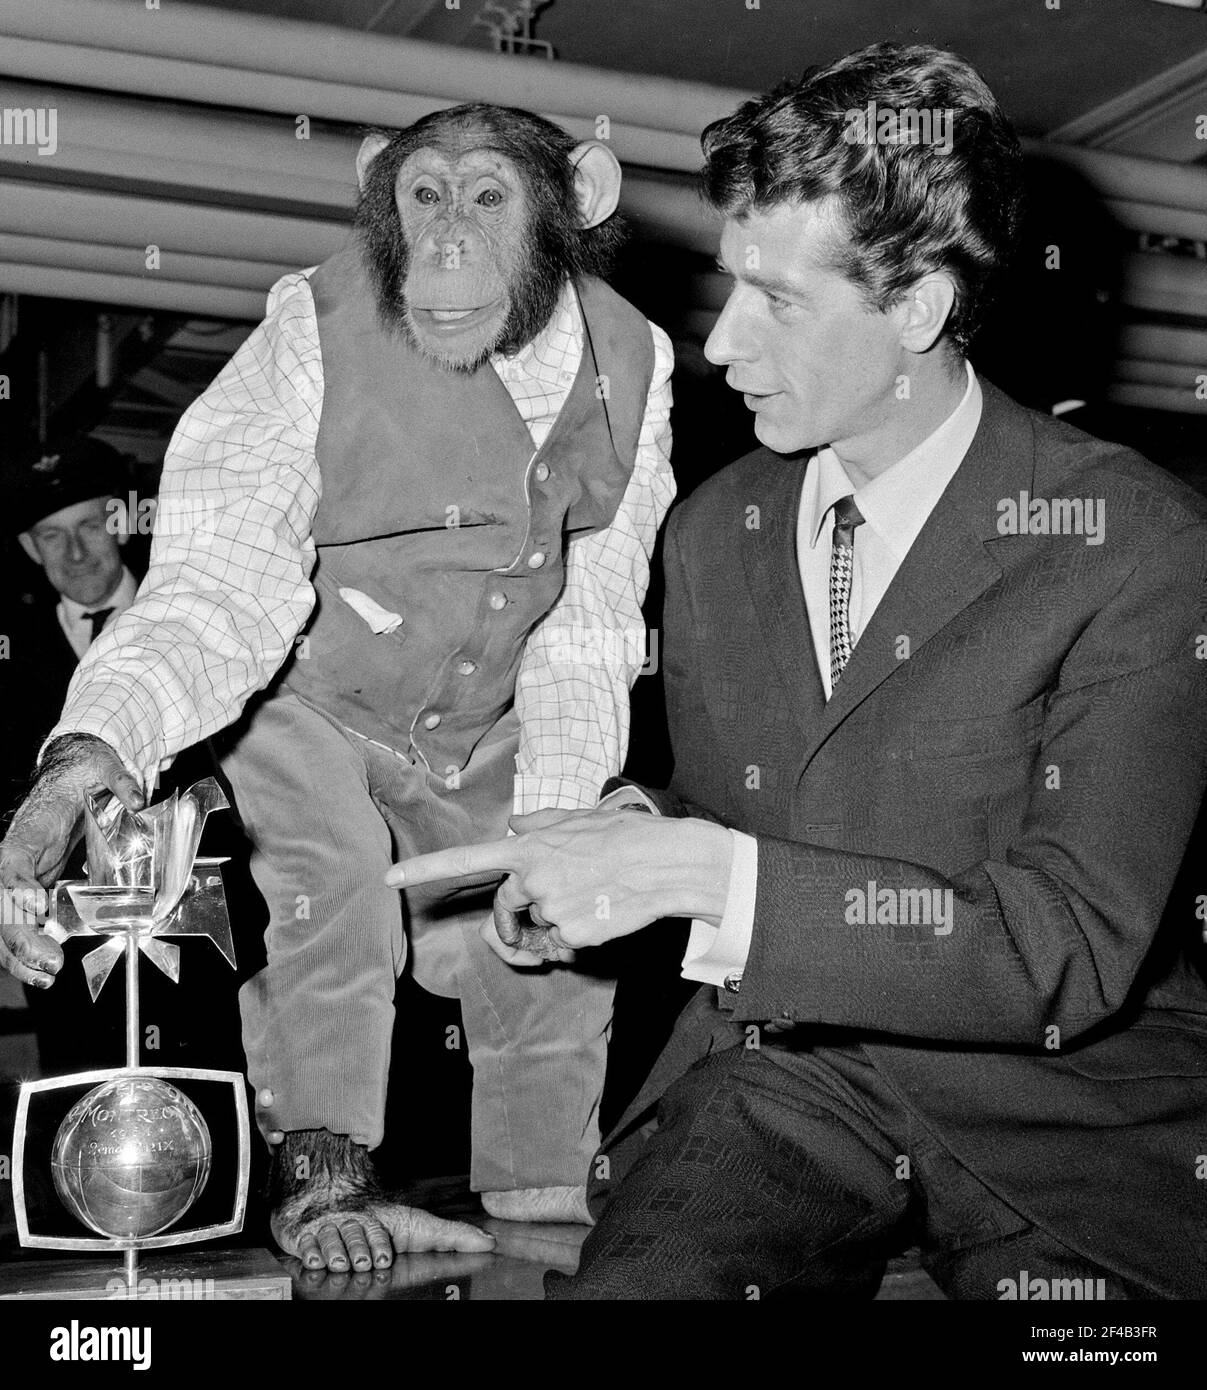 Rudi Carrell has won the silver rose. Rudi Carrell with chimpanzee Plato playing in his show Date April 25, 1964 Location Noord-Holland, Schiphol Stock Photo